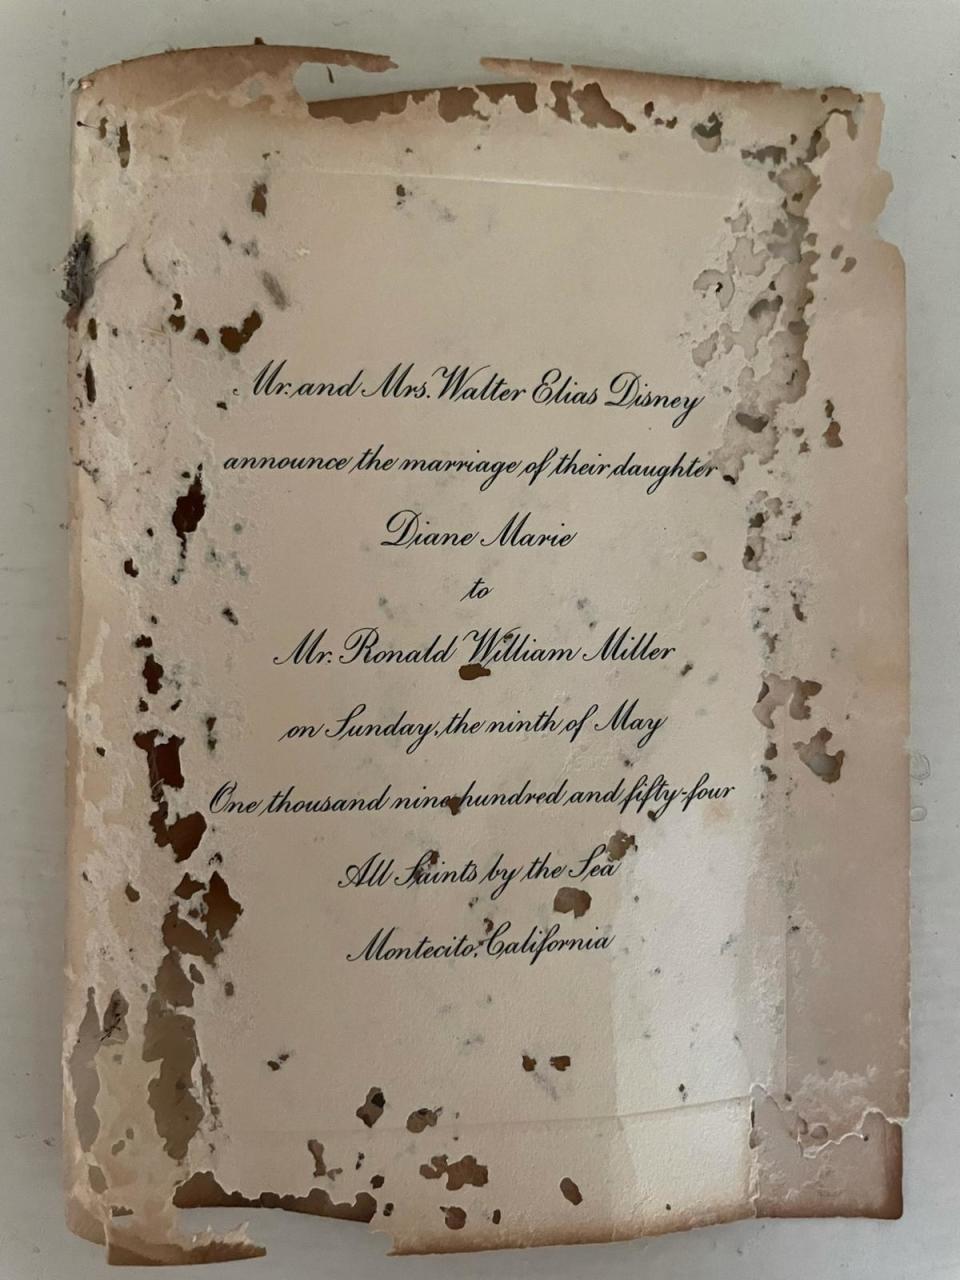 Old wedding invitation announcing marriage of Diane Marie Disney to Ron W. Miller on May 9, 1954, in Montecito, California